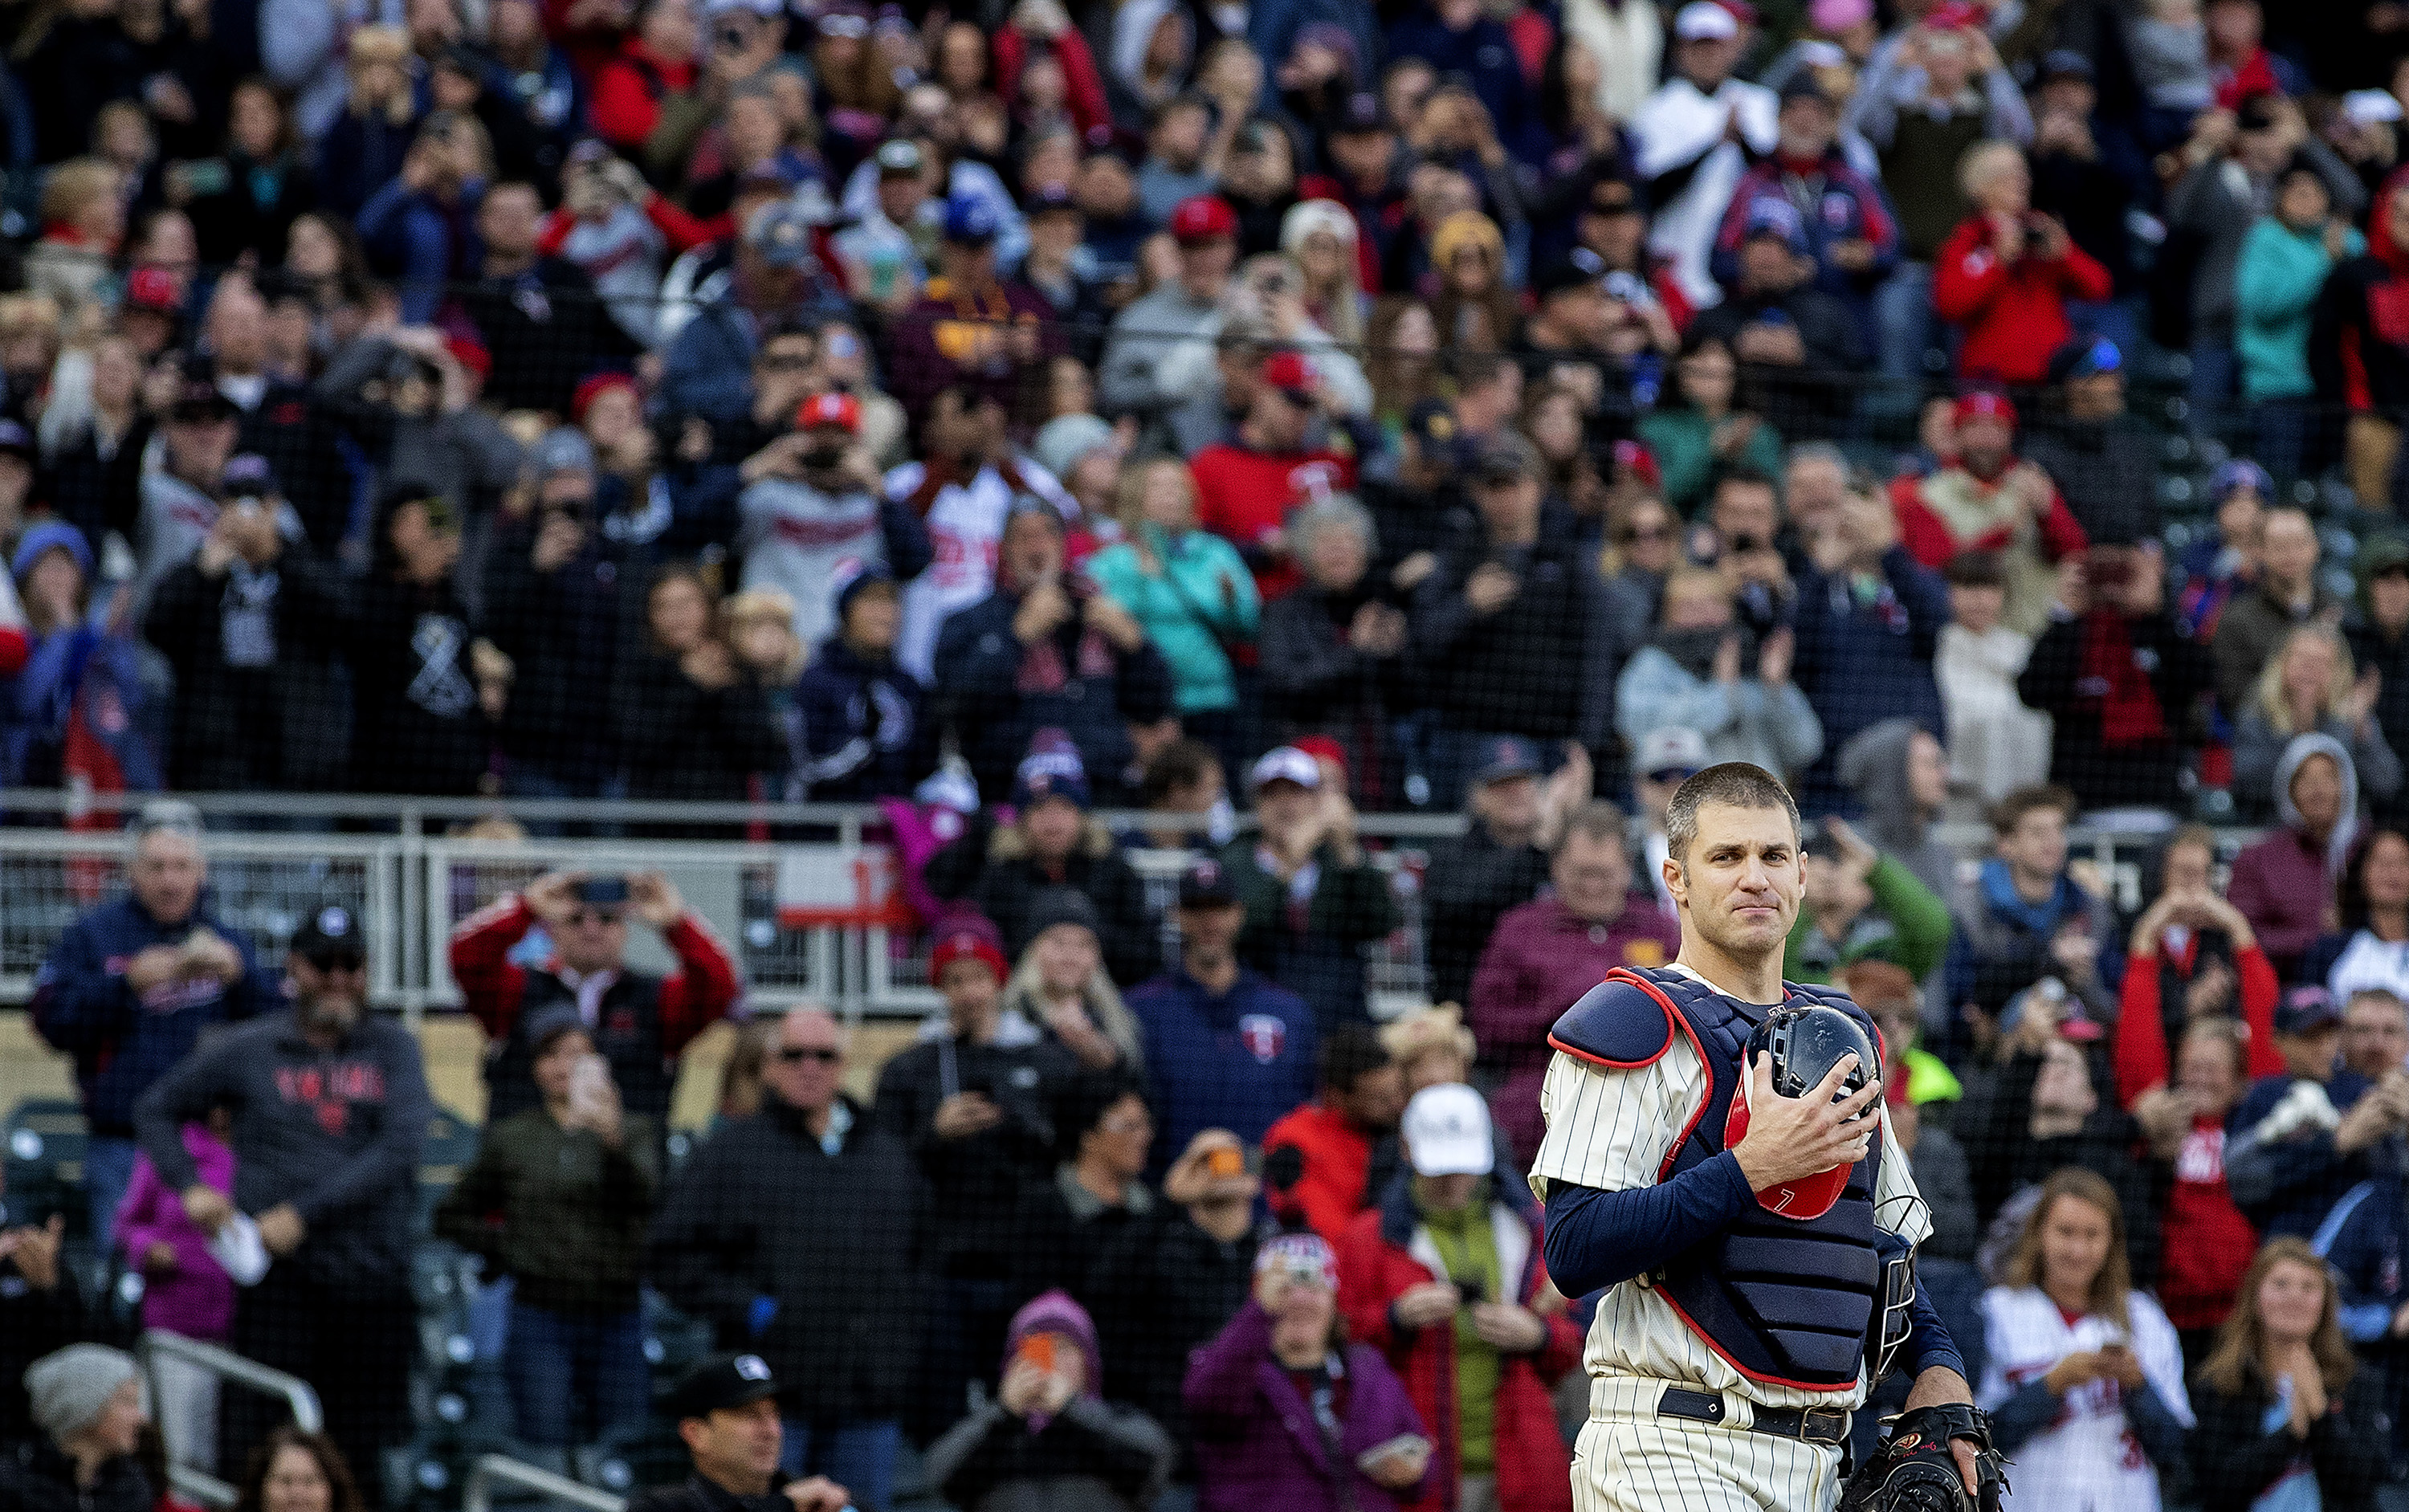 Joe Mauer stunned fans at Target Field — including his father, Jake — in the ninth inning by emerging from the Twins dugout in his catcher’s gear.